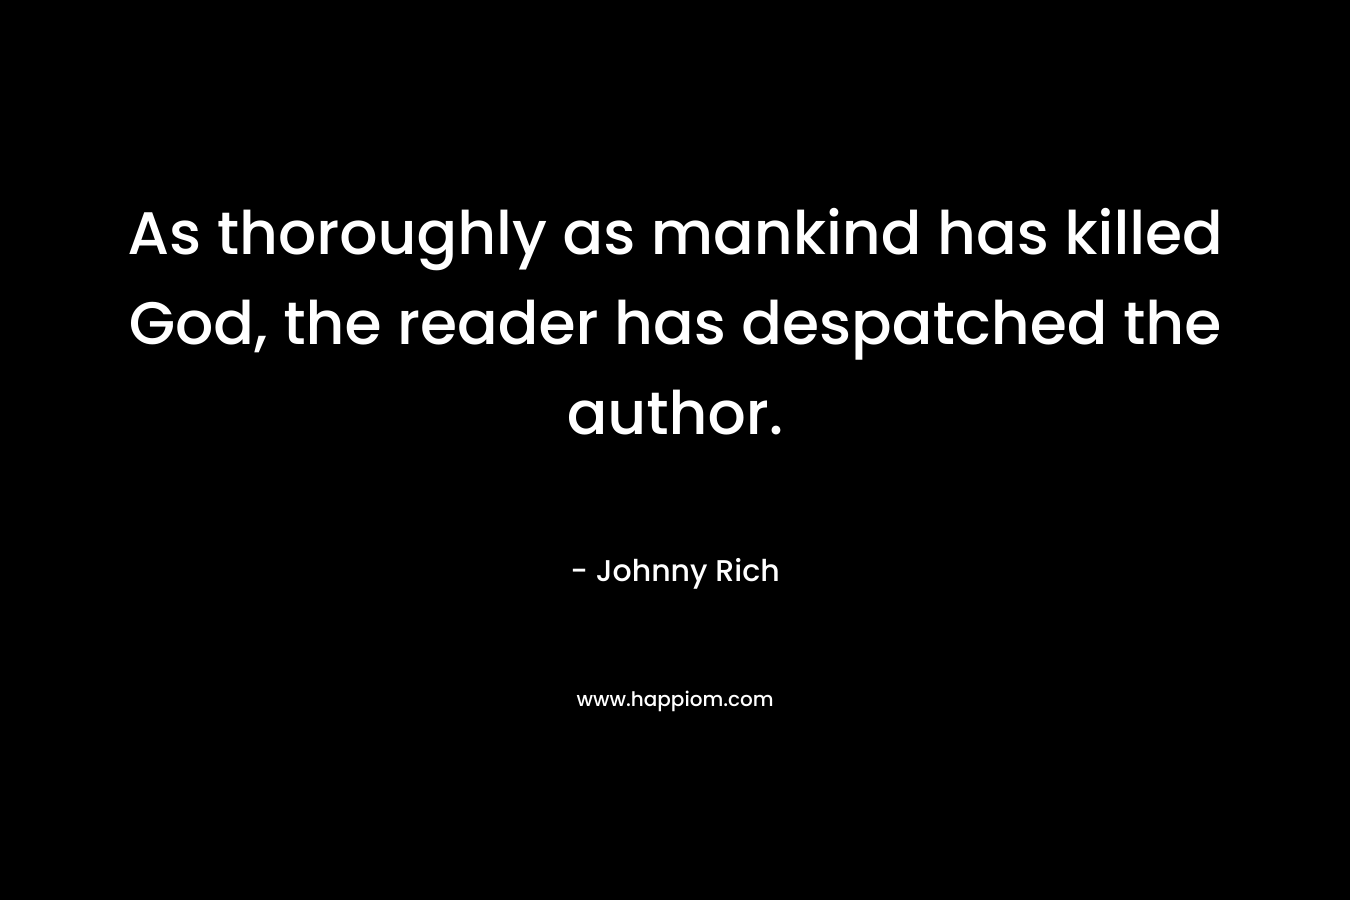 As thoroughly as mankind has killed God, the reader has despatched the author. – Johnny Rich